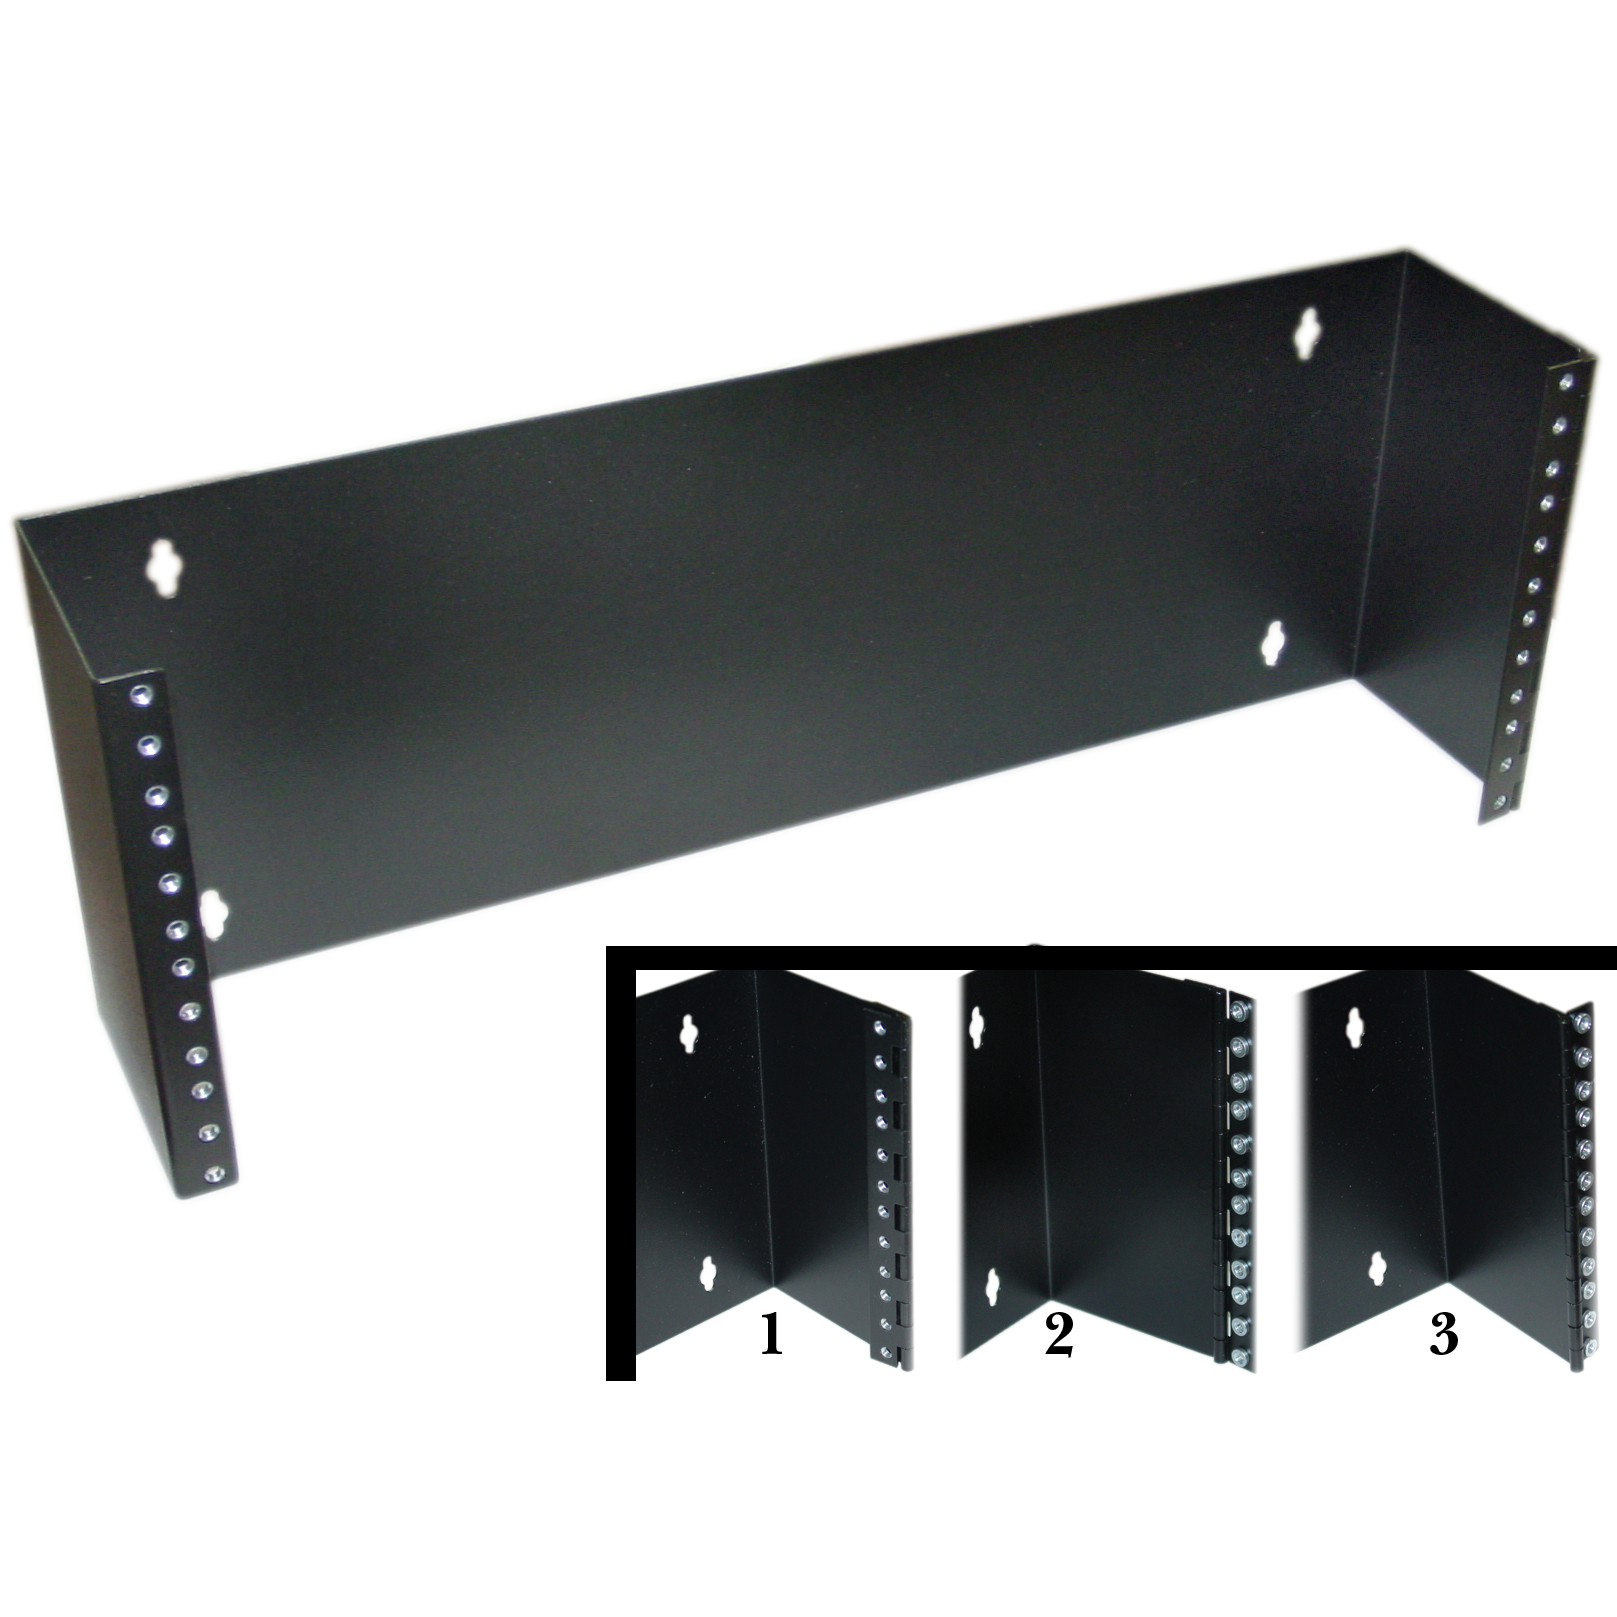 4U Hinged Wall Mount Bracket, Depth 5.8 in - Click Image to Close